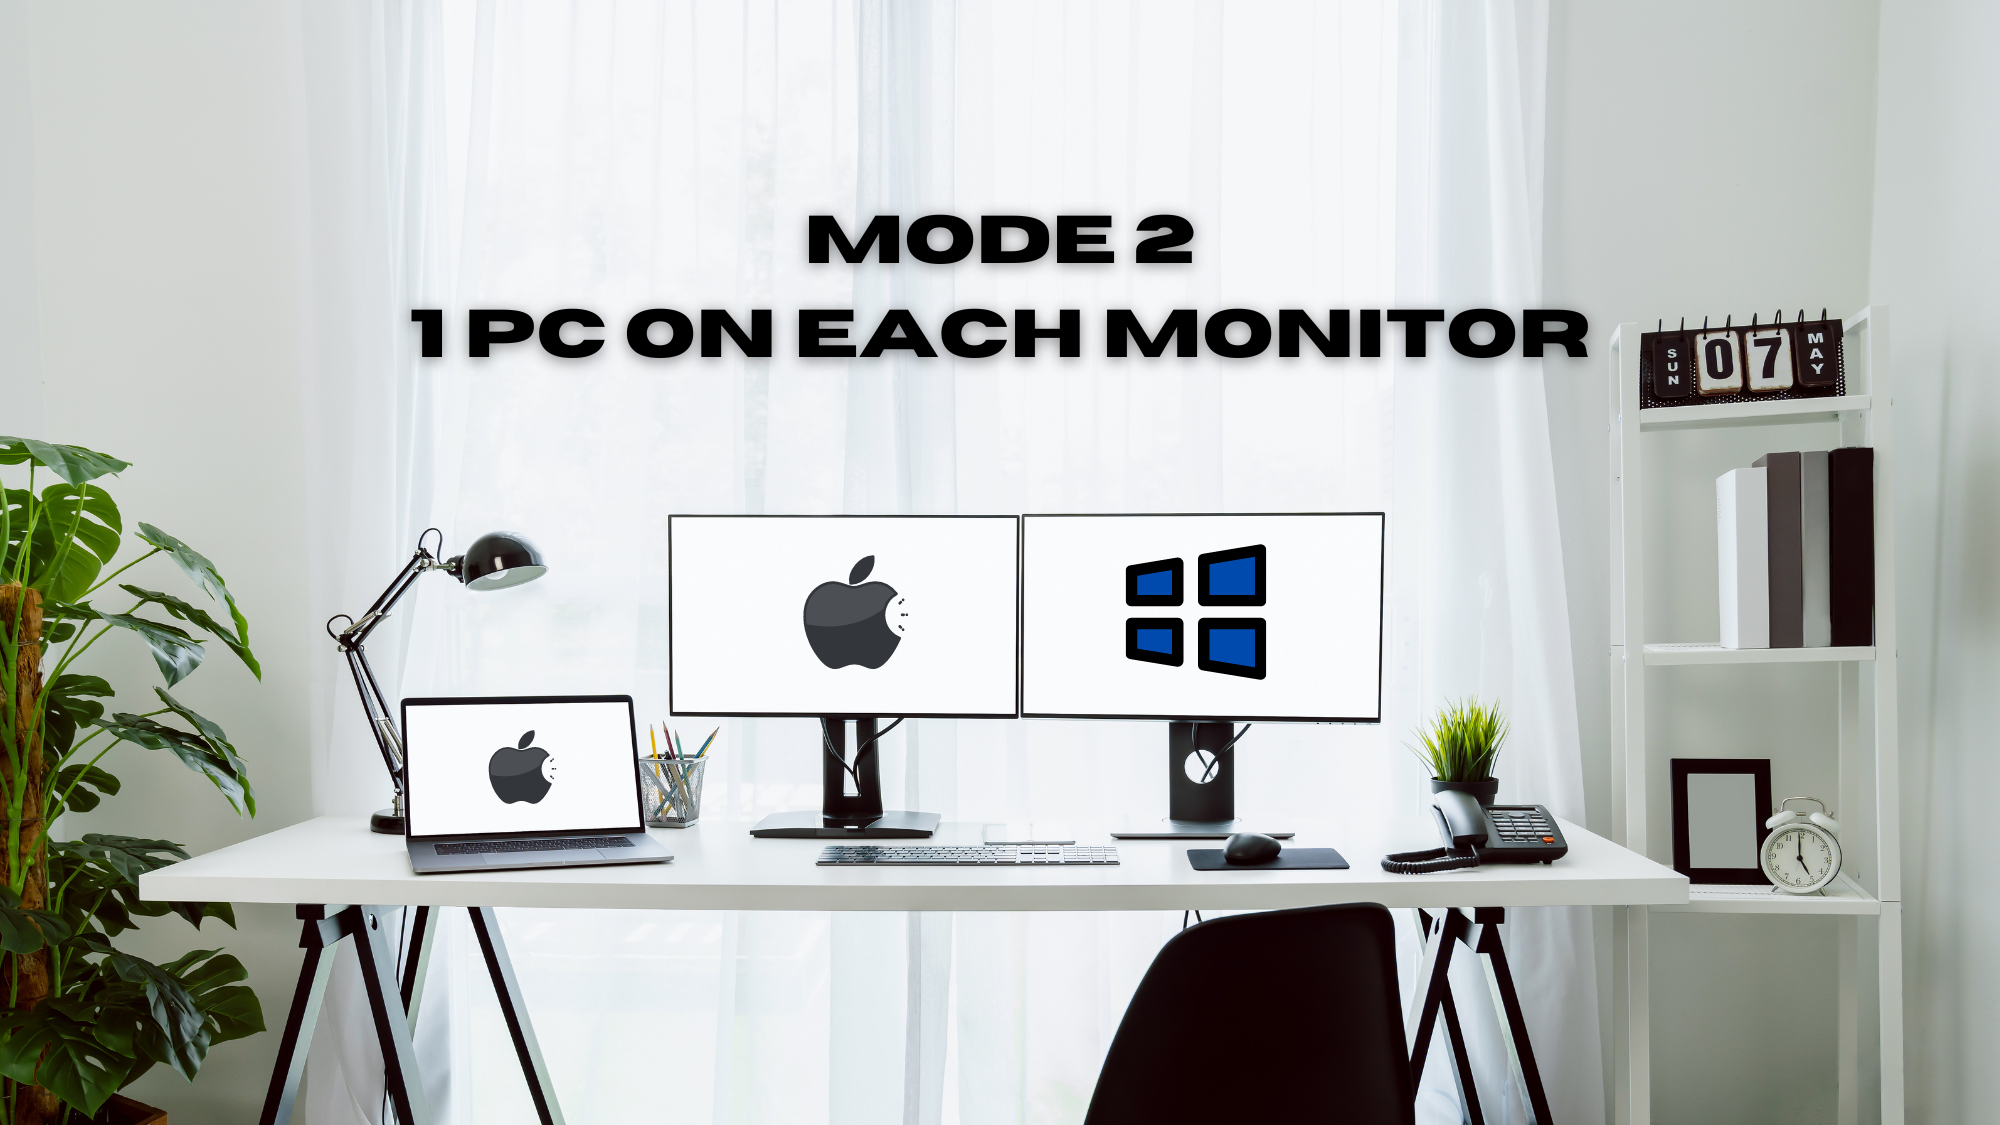 How to get Mode 2 ;Each computer displayed on each monitor simultaneously